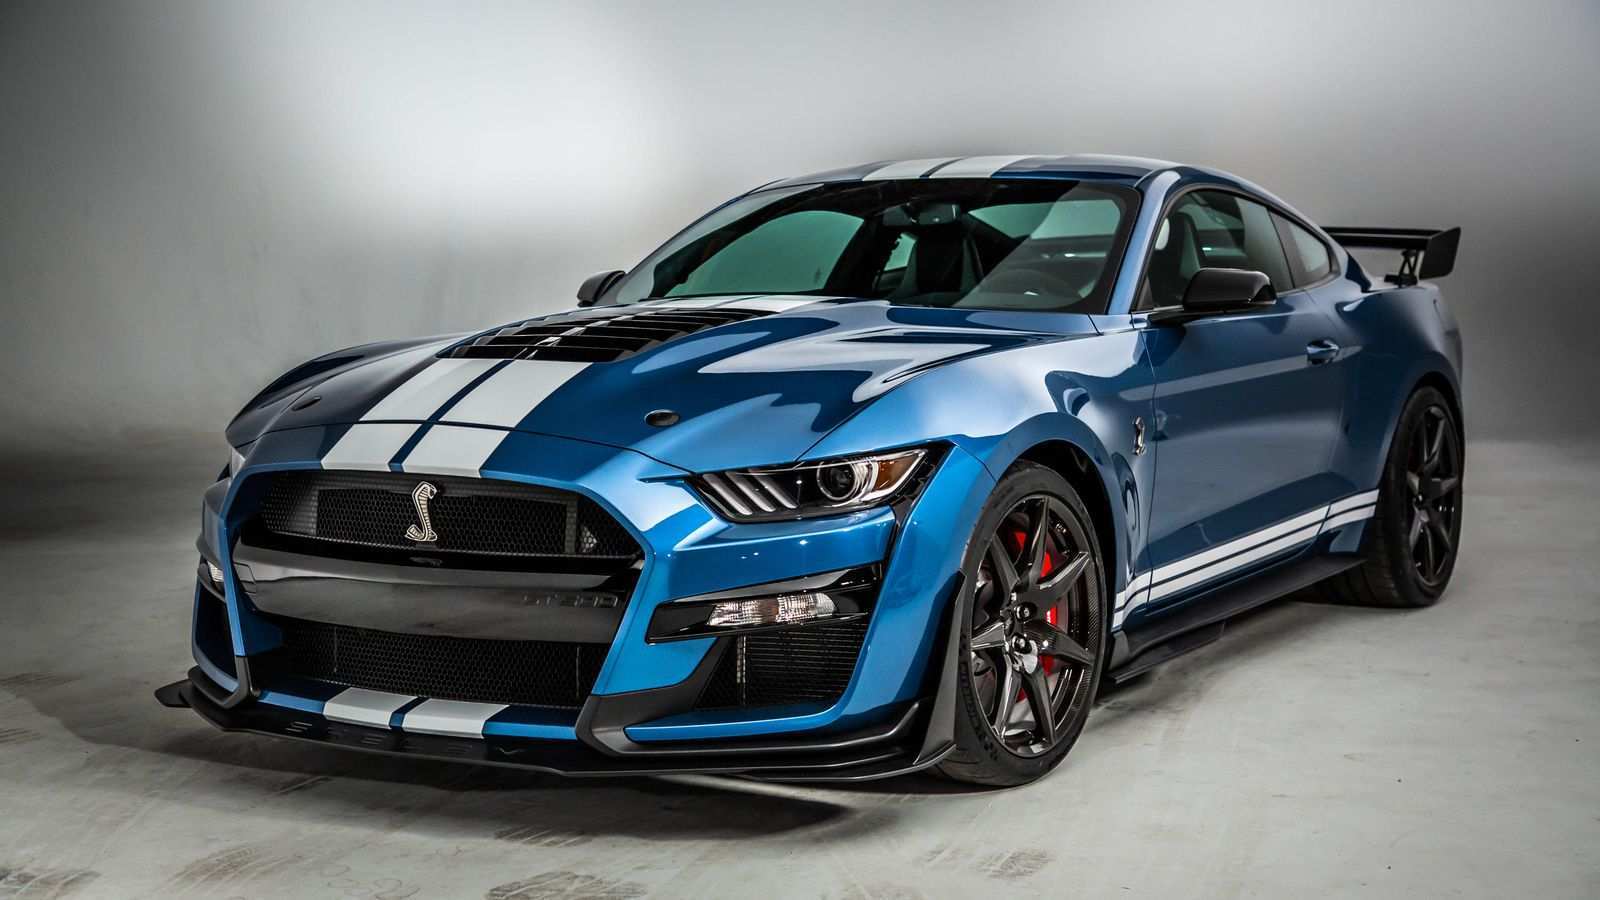 Gallery of 2020 Ford Mustang Gt Speed Test with 2020 Ford Mustang Gt Review, Car Review